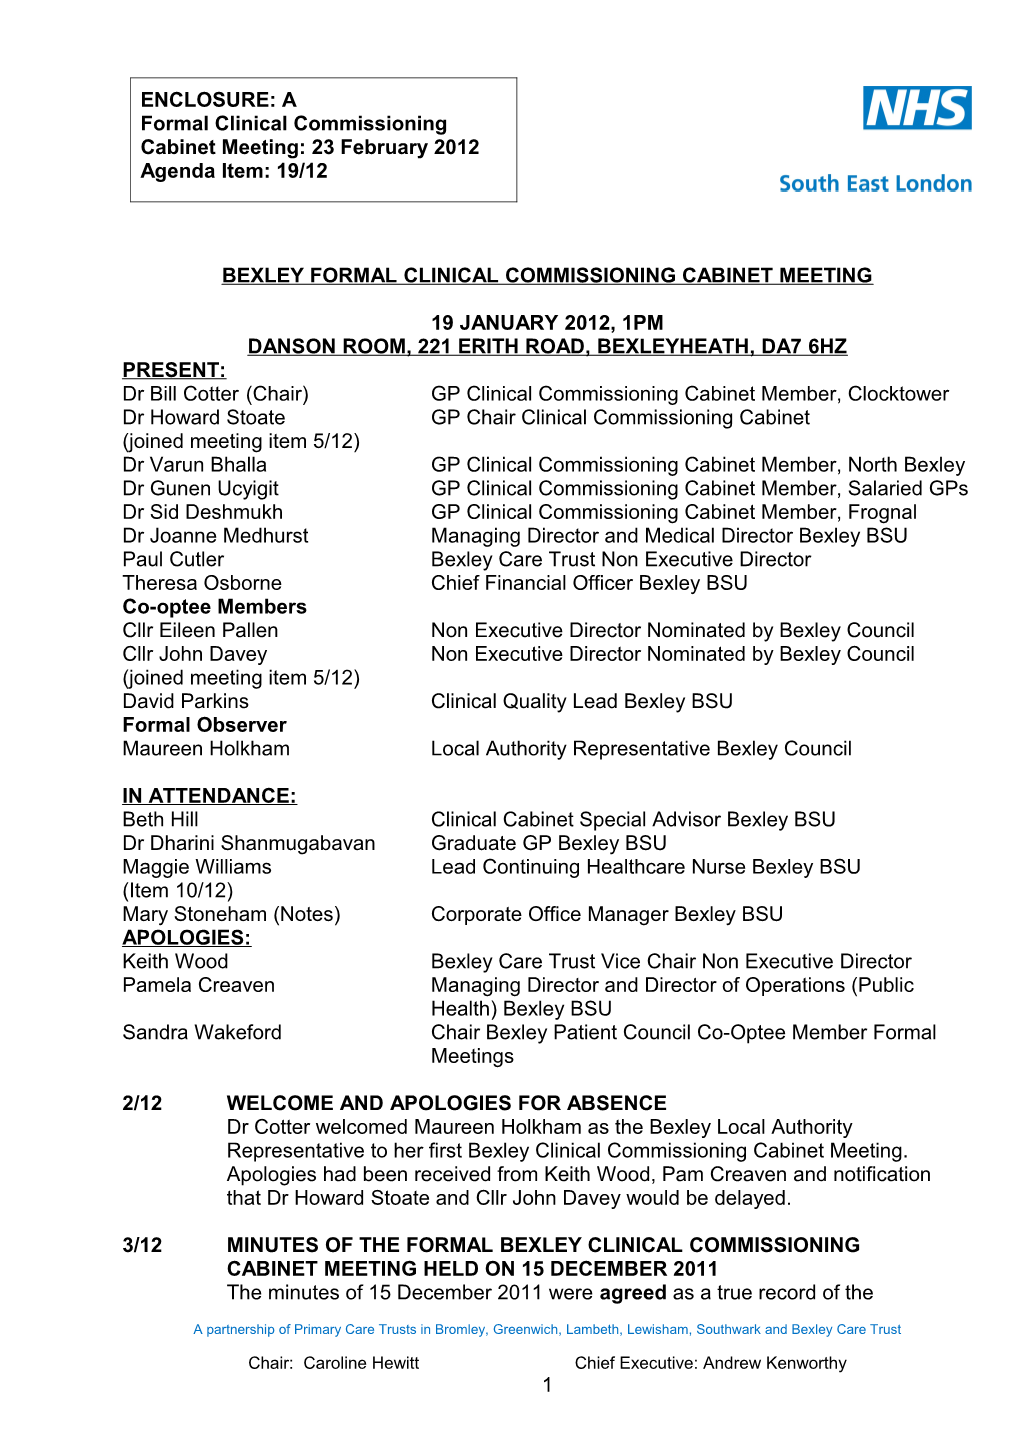 Bexley Formal Clinical Commissioning Cabinet Meeting